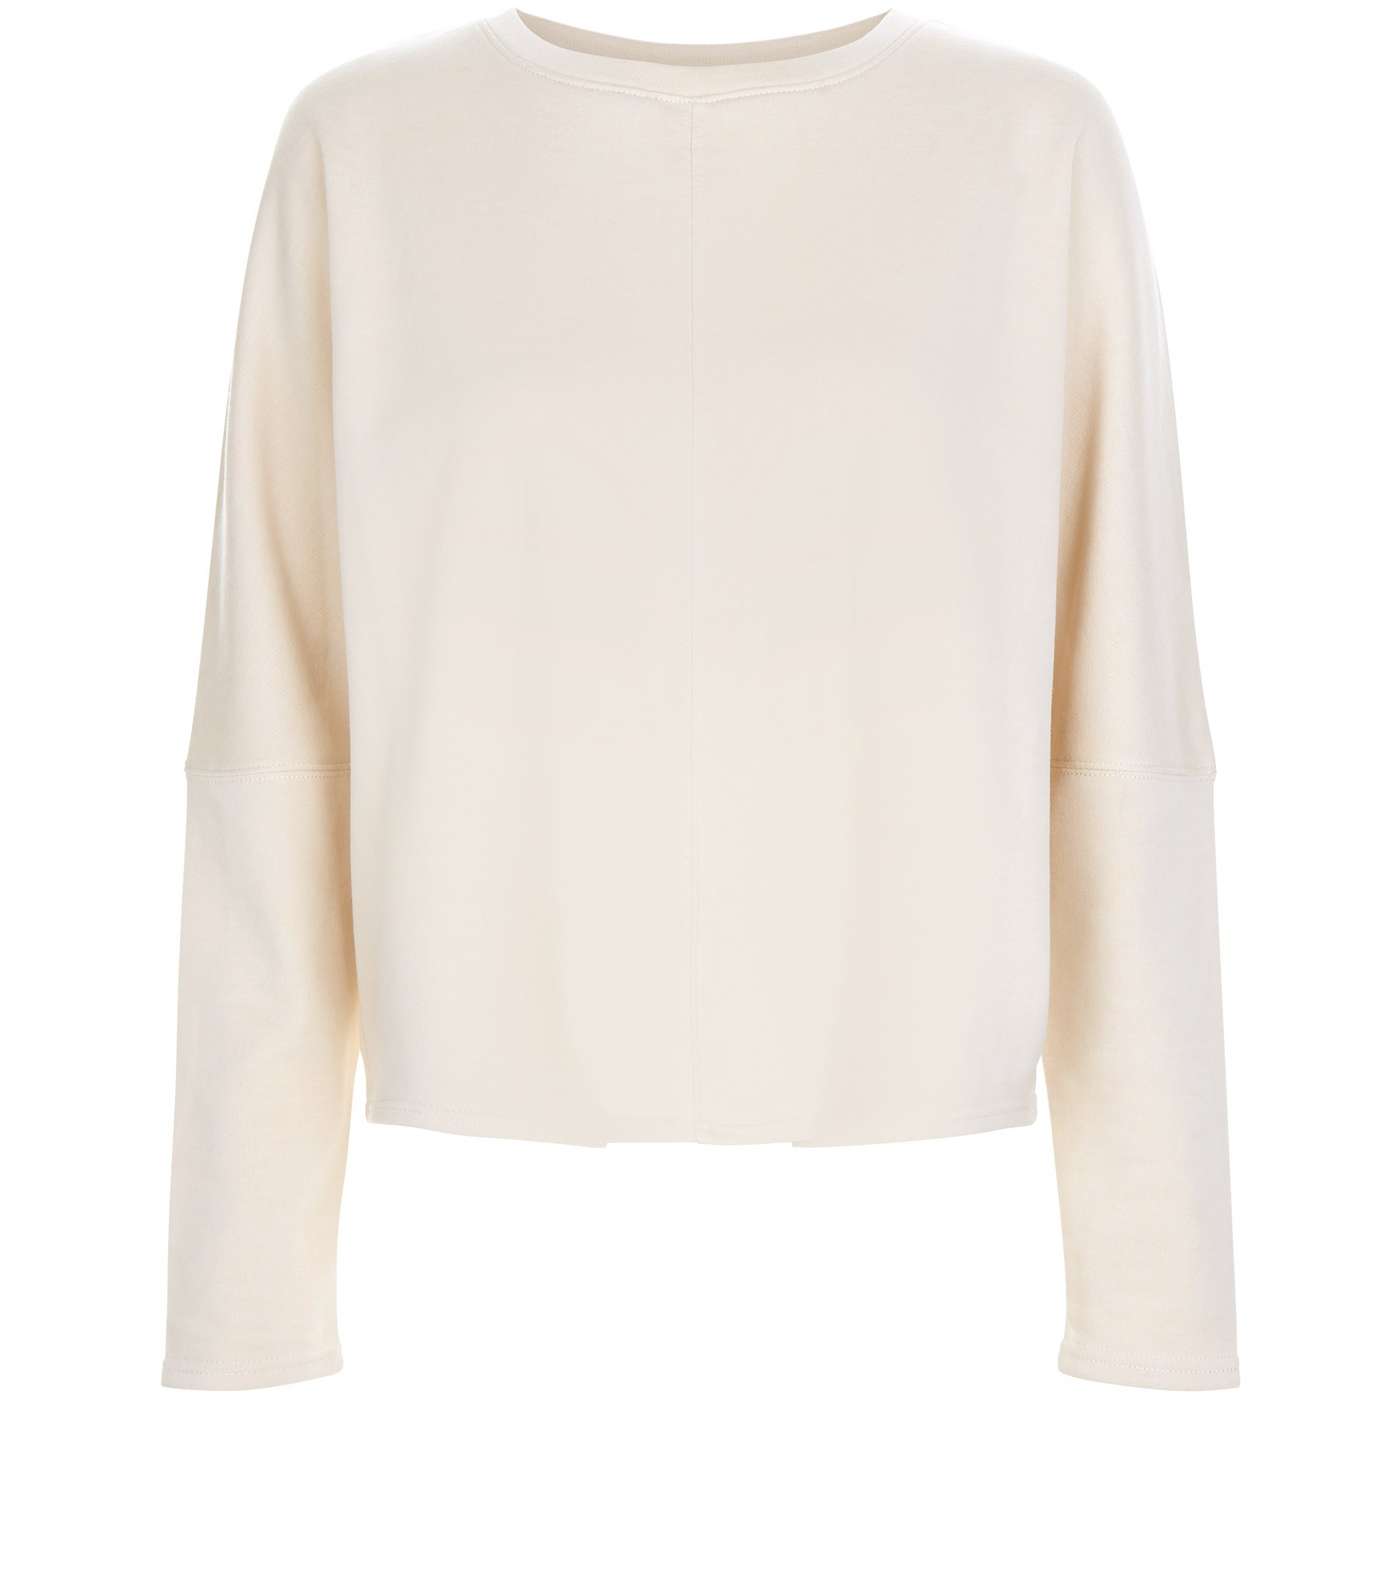 Shell Pink Batwing Sleeve Cropped Sweater 